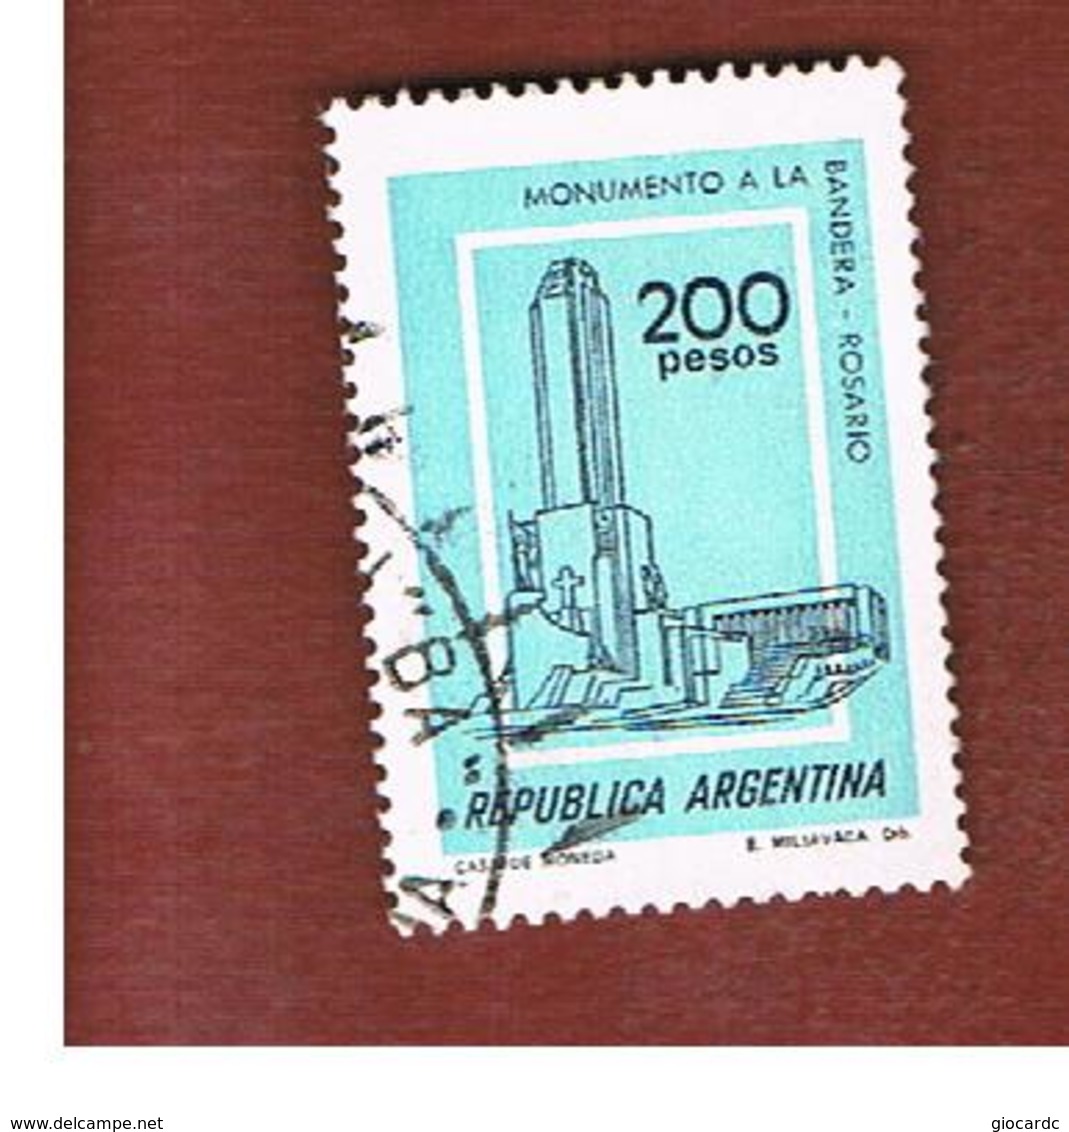 ARGENTINA - SG 1546  - 1977  BUILDINGS:  FLAG MONUMENT, ROSARIO   -   USED ° - Usados